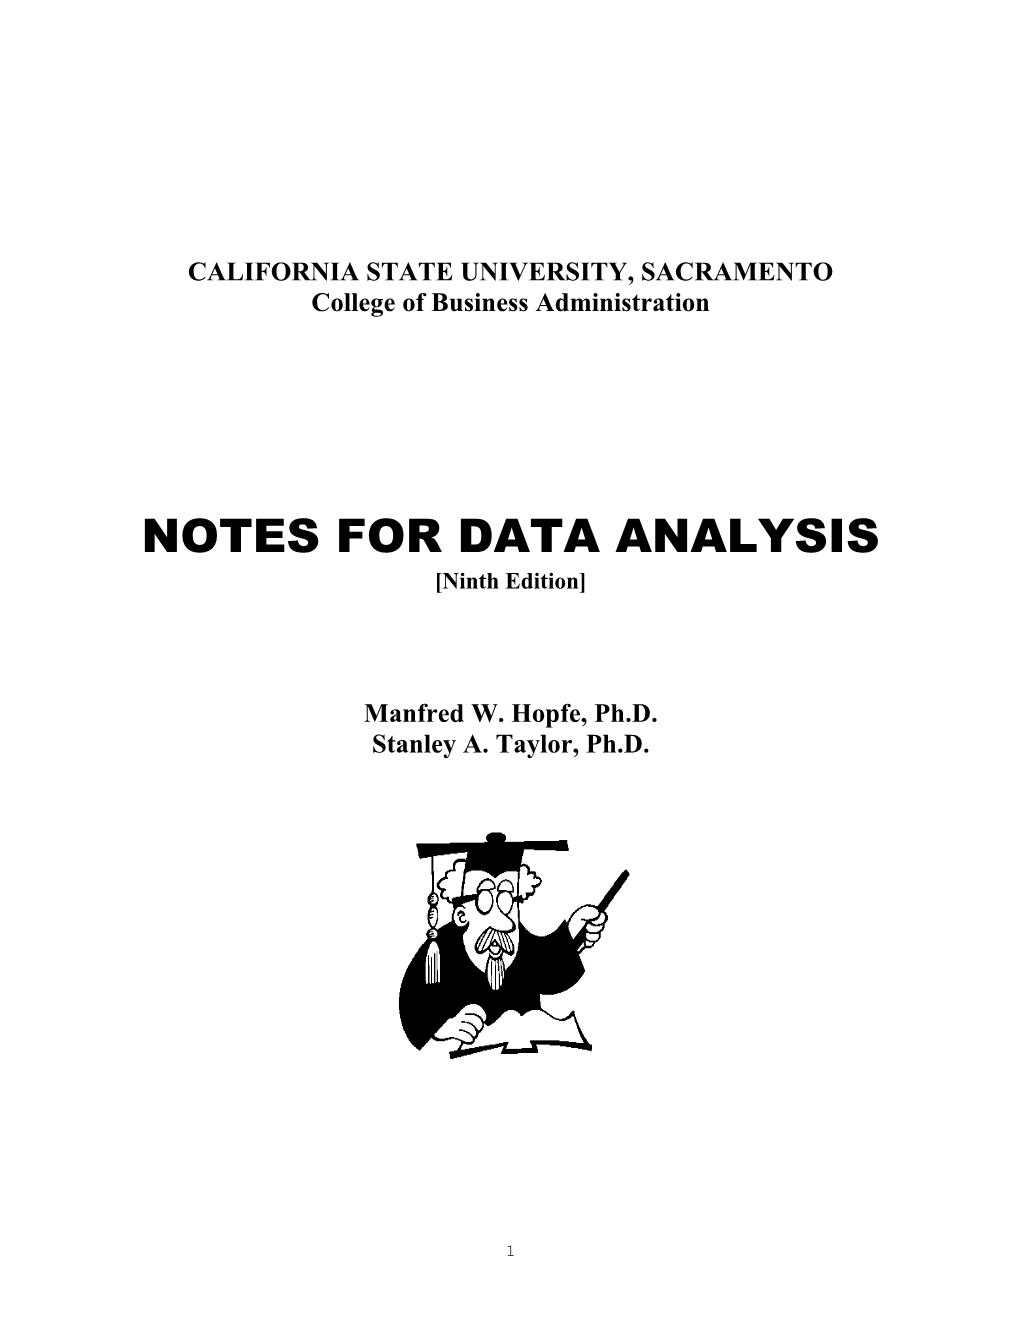 Notes for Data Analysis